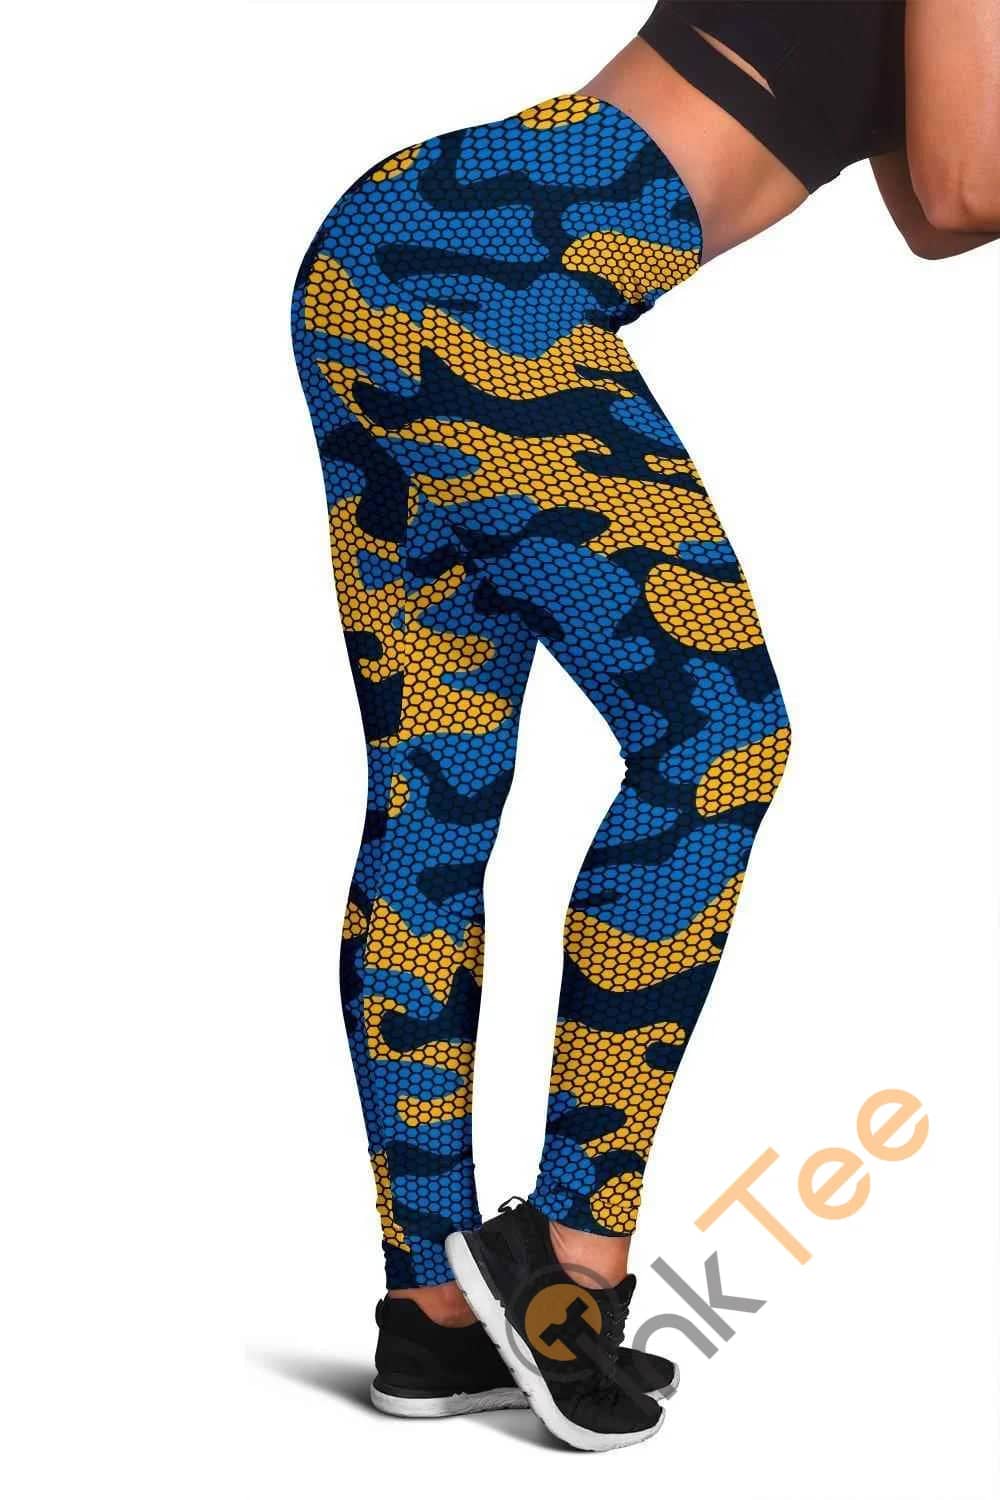 Los Angeles Chargers Inspired Hex Camo 3D All Over Print For Yoga Fitness Fashion Women's Leggings